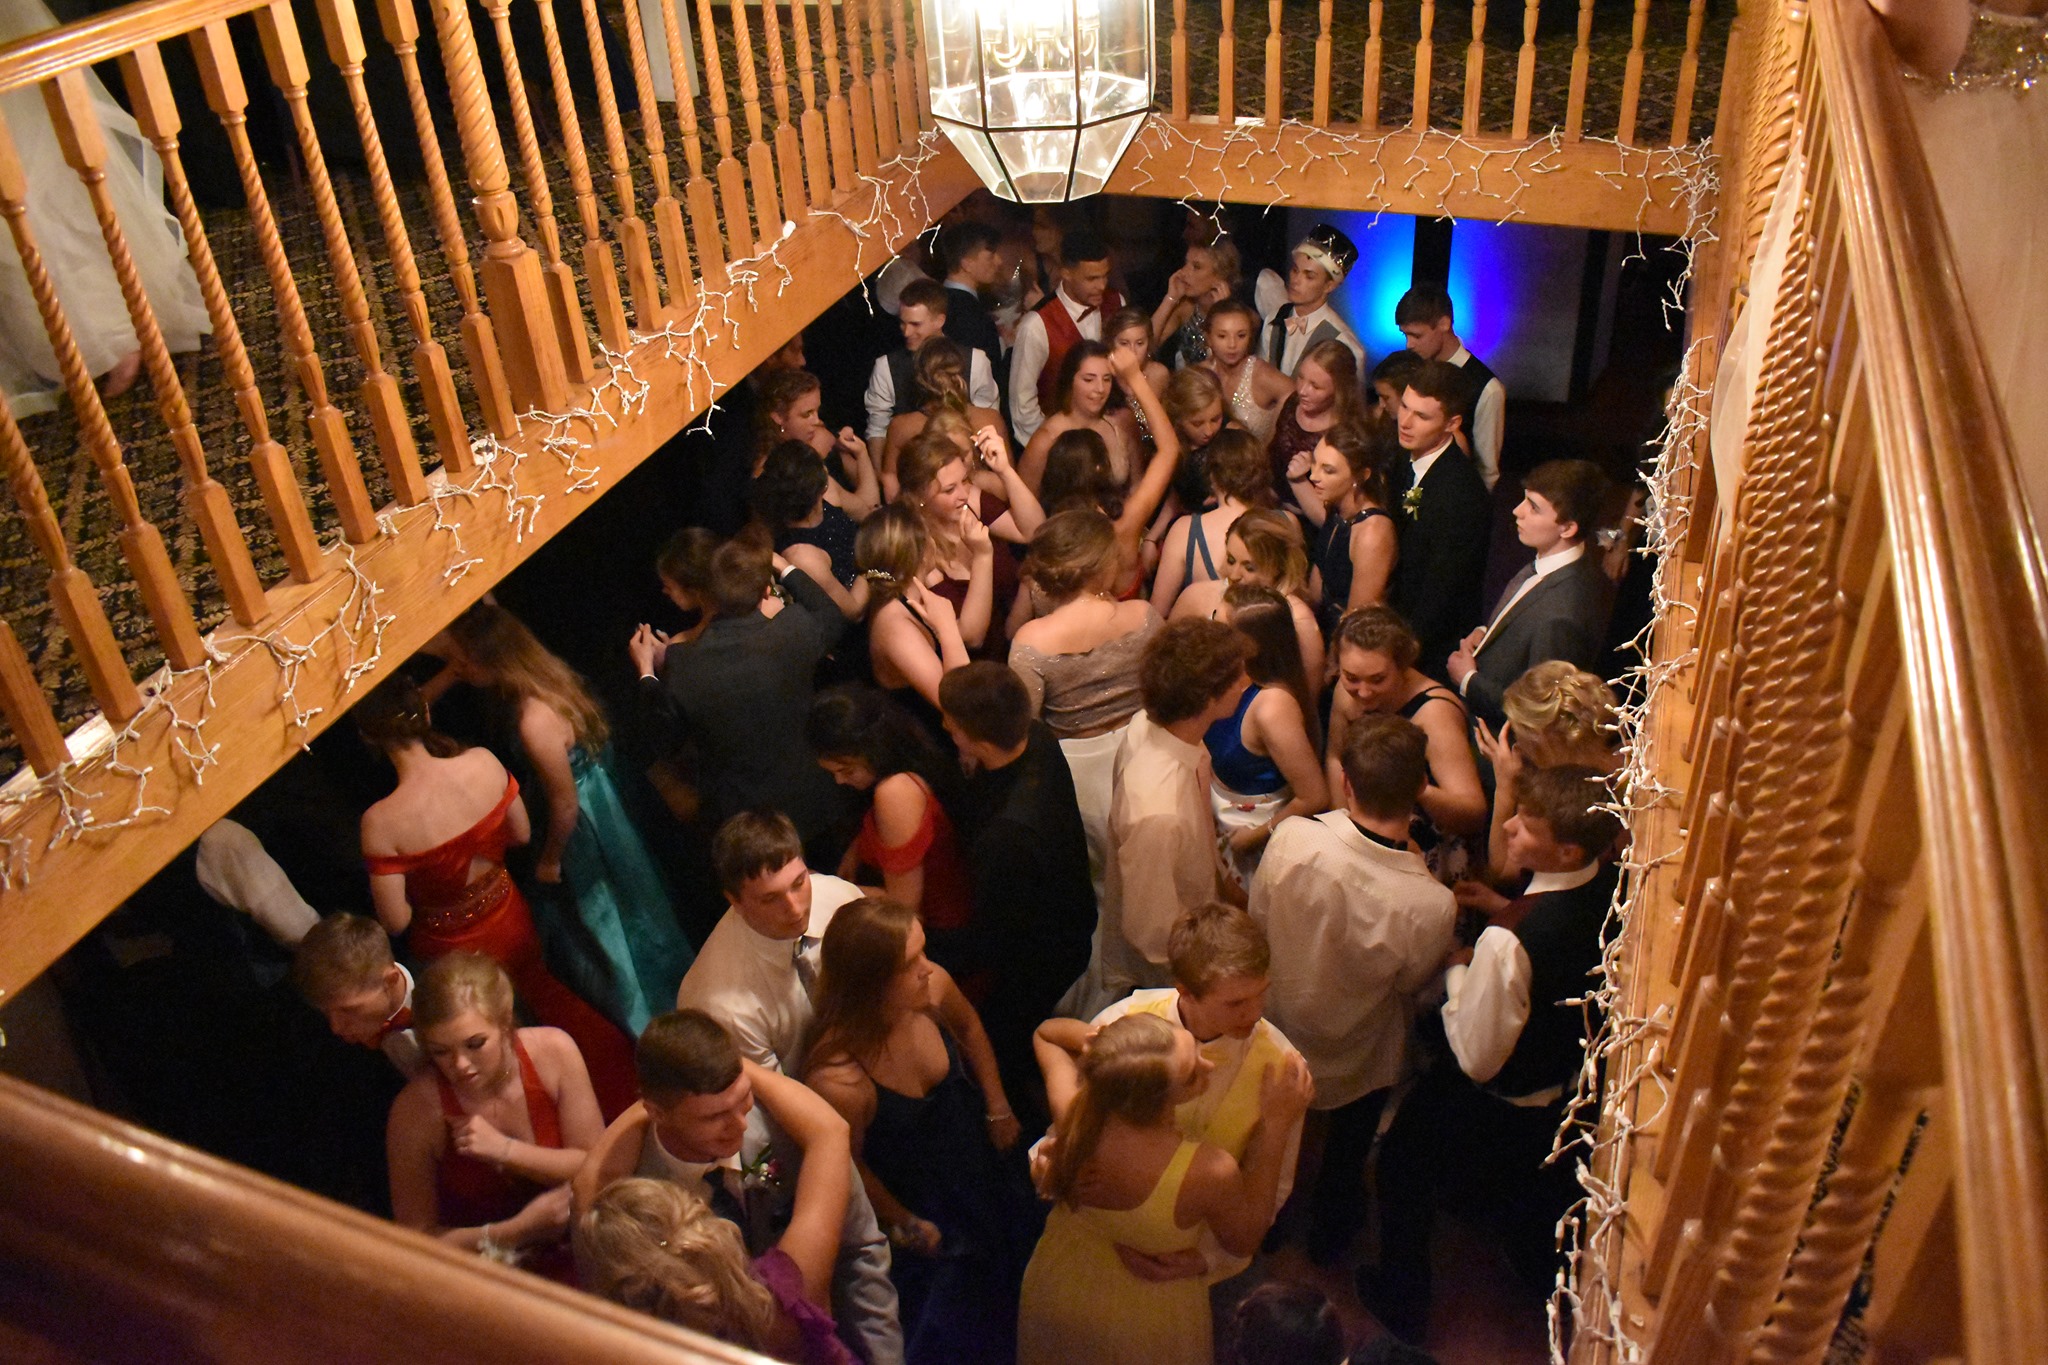 Energetic dance floor on the Michigan Princess Riverboat during a prom event.